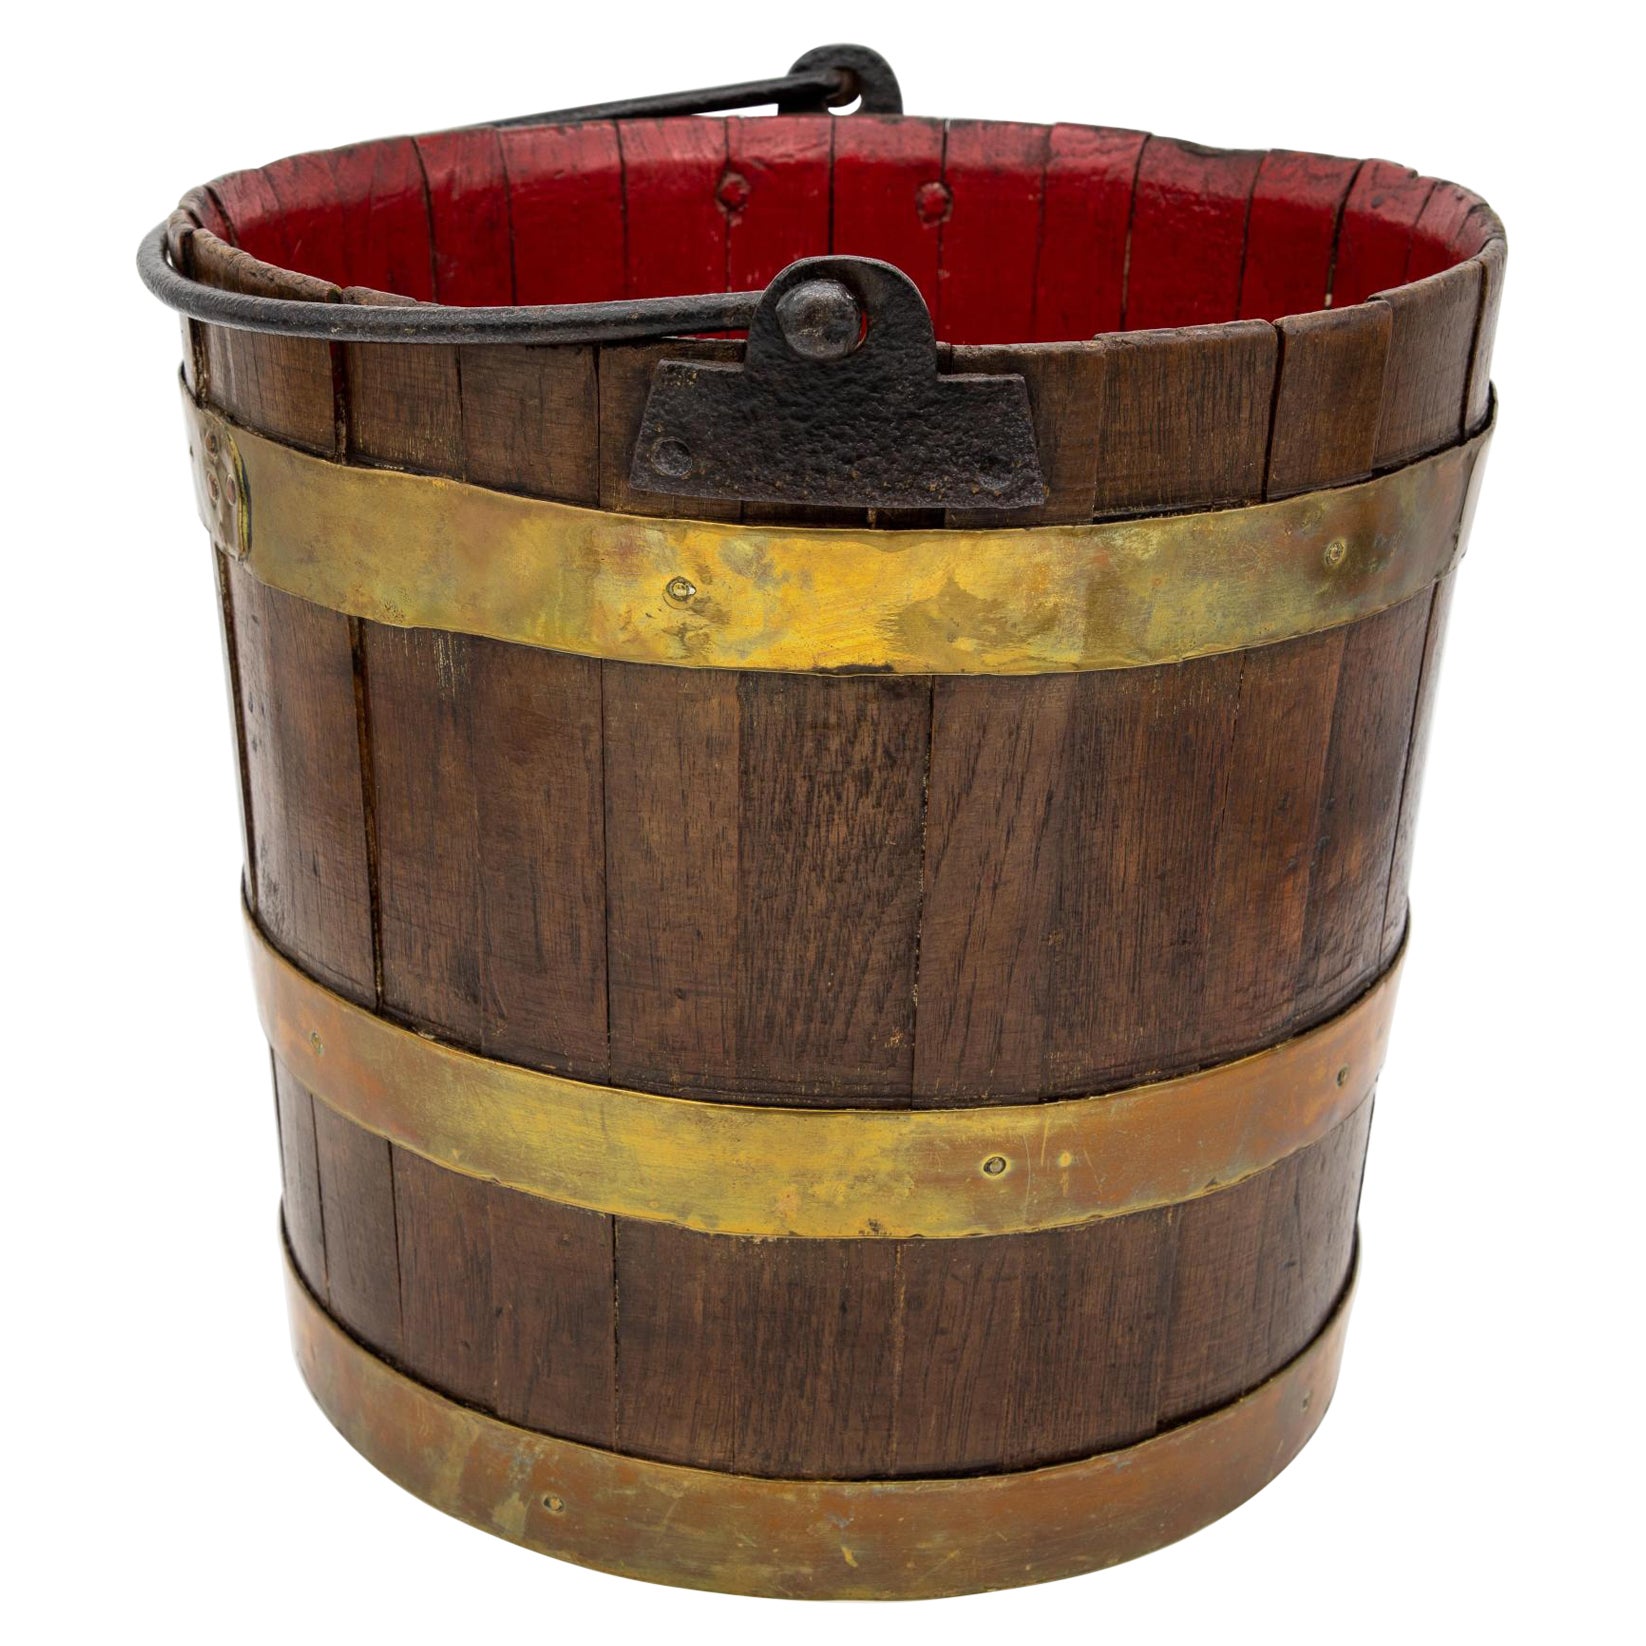 Wooden Bucket with Red Interior and Brass Accents